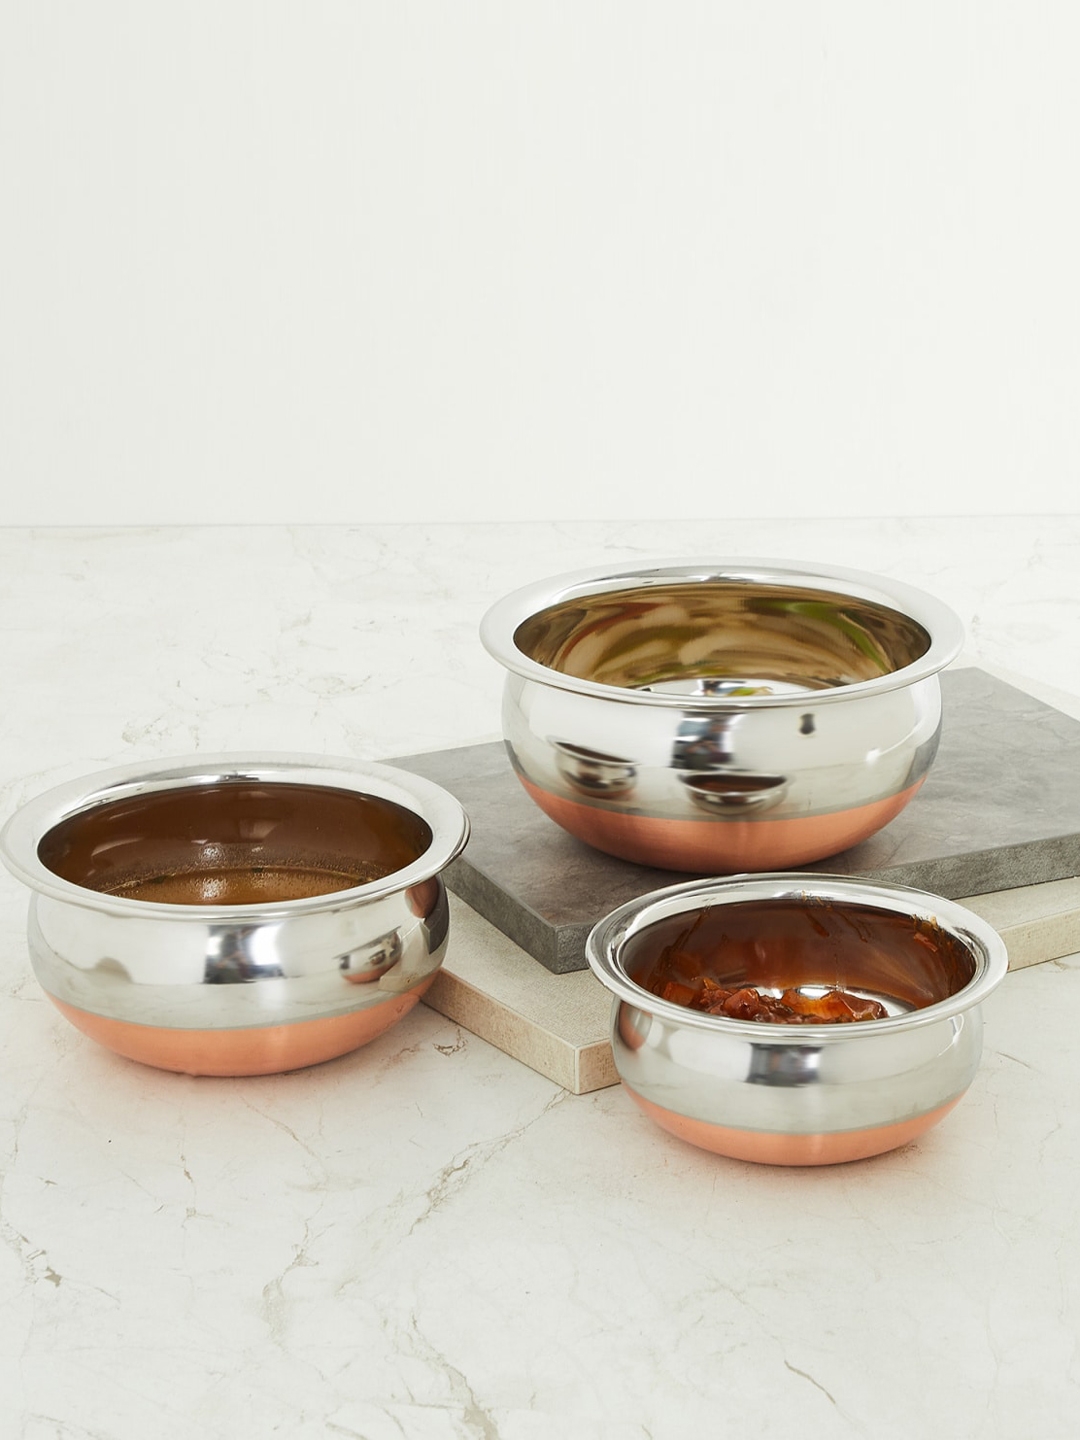 Home Centre Set Of 3 Silver Cookware Stainless Steel